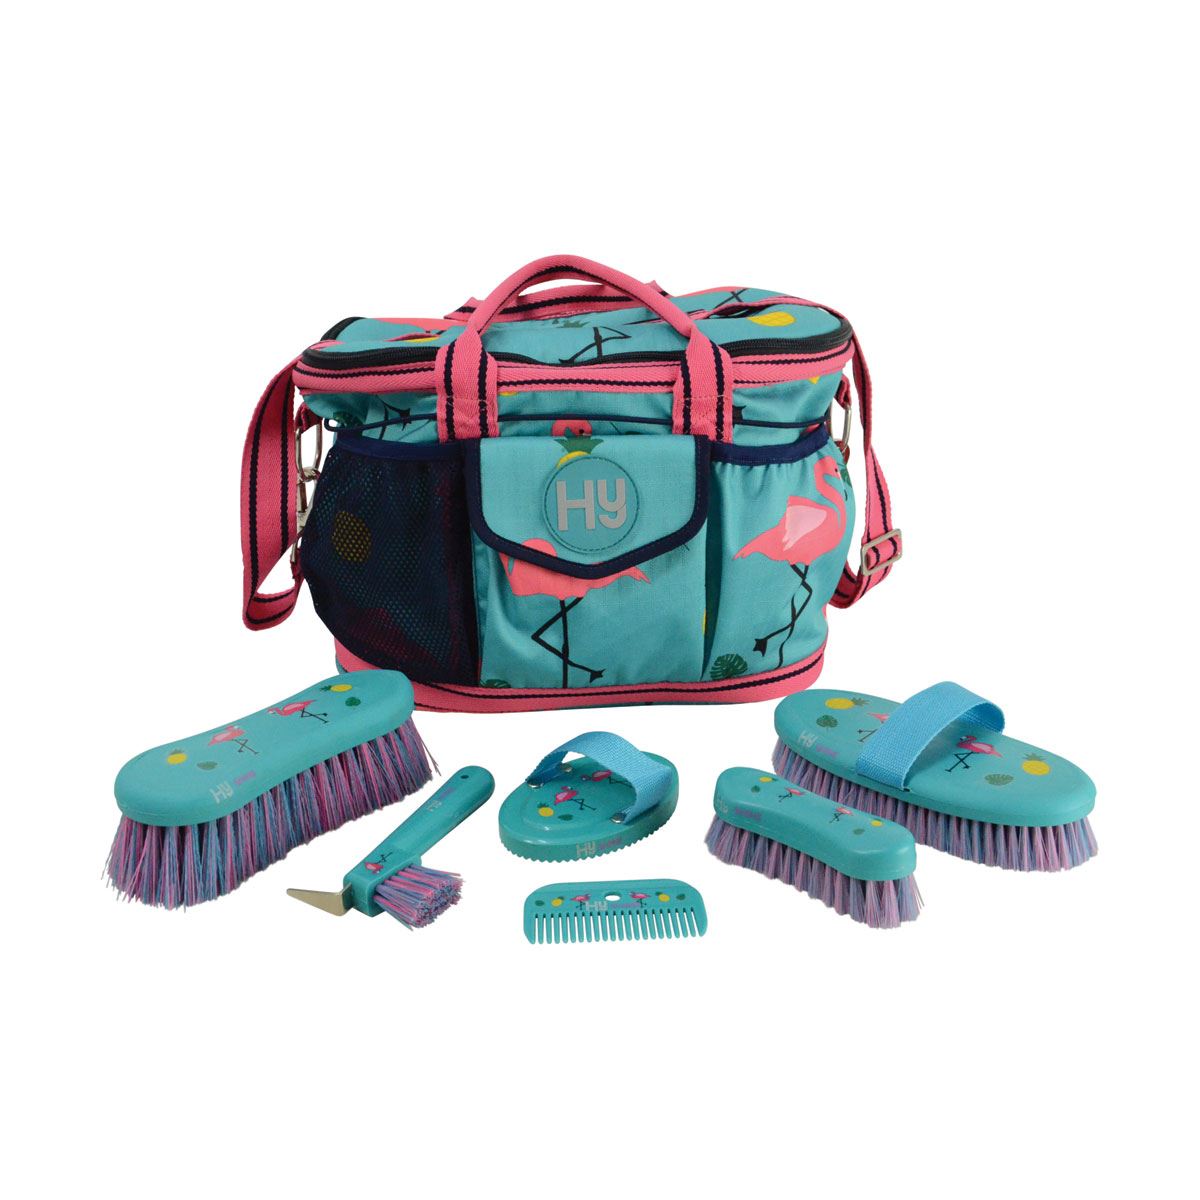 Hy Flamingo Complete Grooming Bag - Just Horse Riders